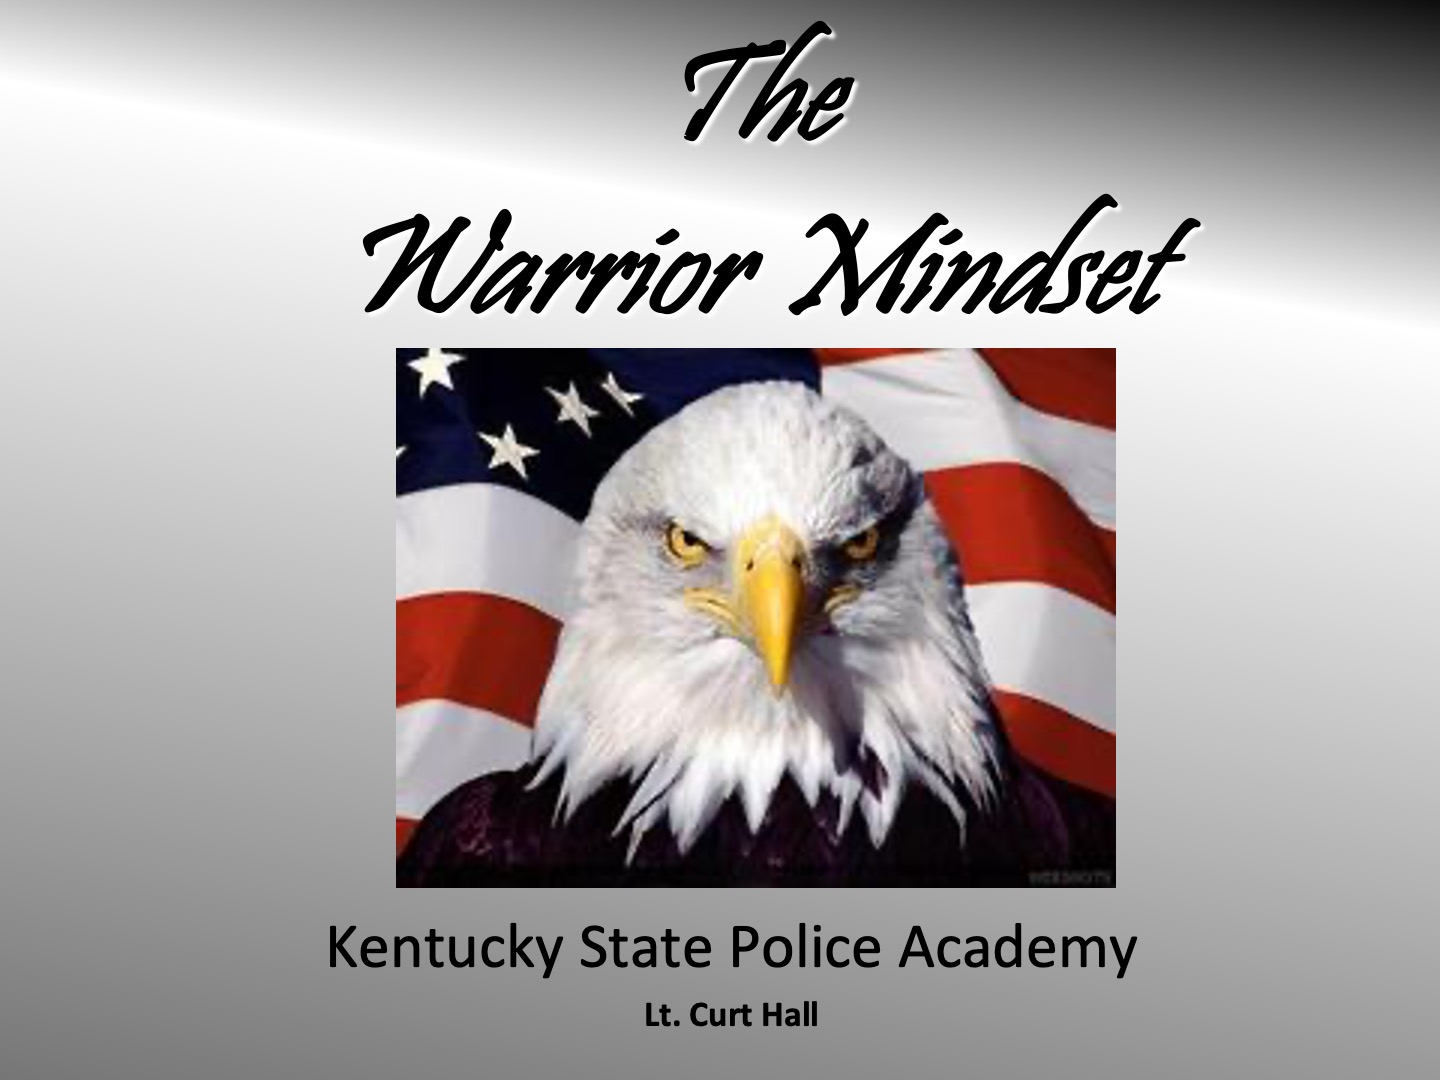 High School Paper Reveals Kentucky State Police Once Used Hitler Quotes in Training Materials